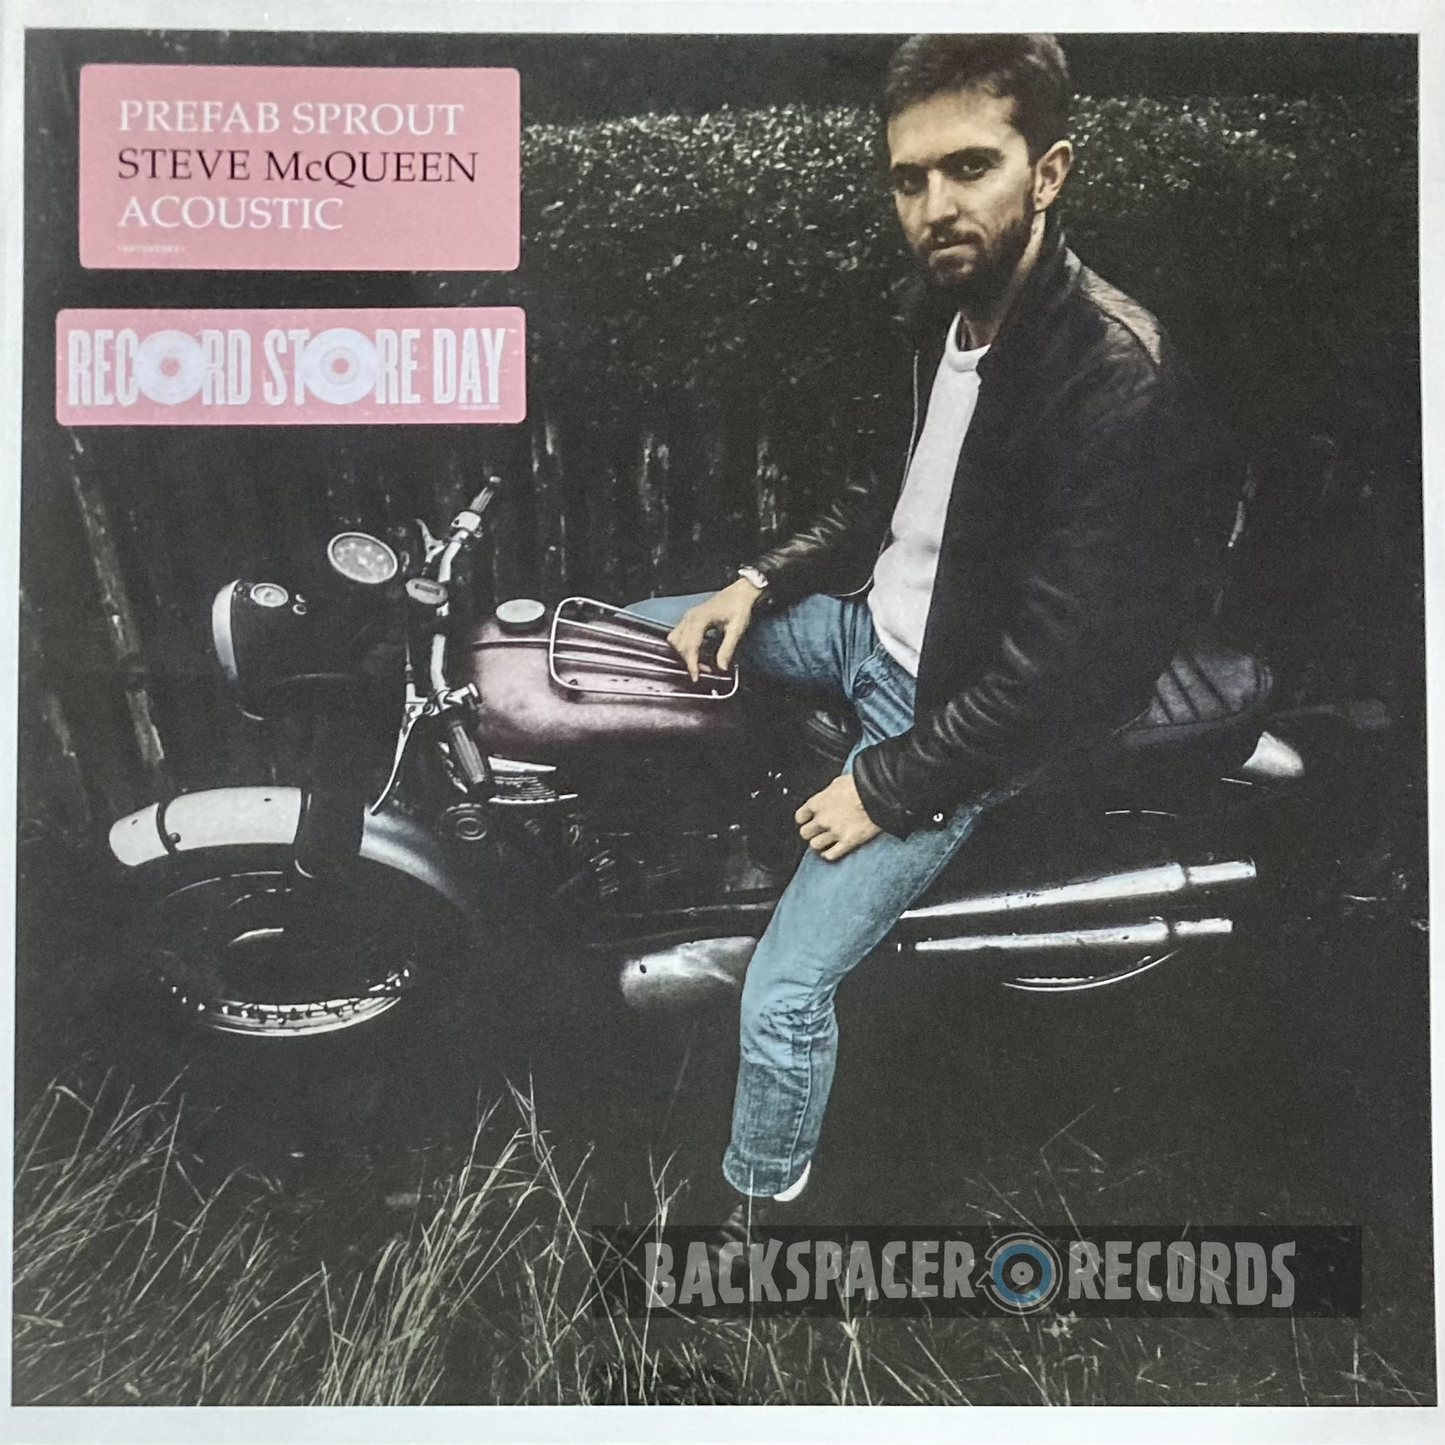 Prefab Sprout – Steve McQueen Acoustic (Limited Edition) LP (Sealed)